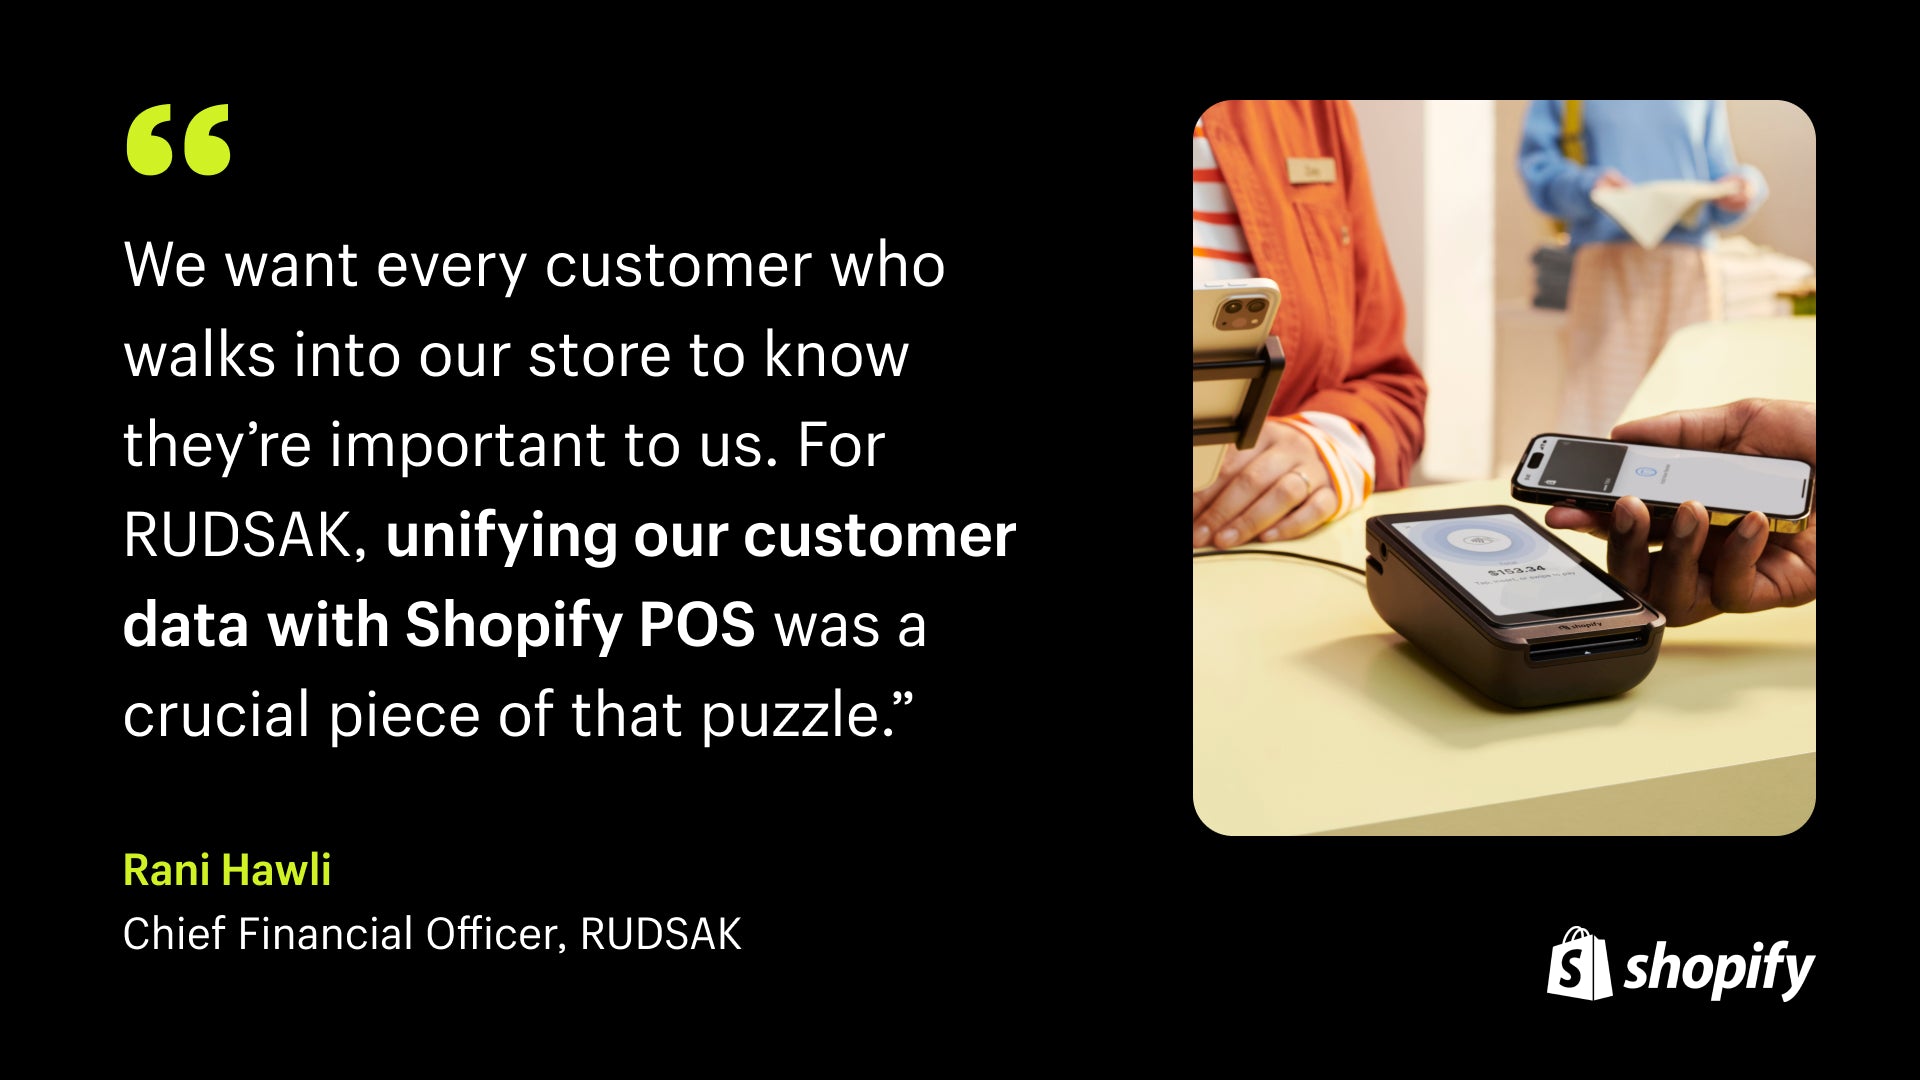 Black background with a quote in white text from Rudsak CFO that reads, "We want every customer who walks into our store to know they're important to us. For RUDSAK, unifying our customer data with Shopify POS was a crucial piece of that puzzle." Beside the quote is an image of a woman at check out using the Shopify POS system.